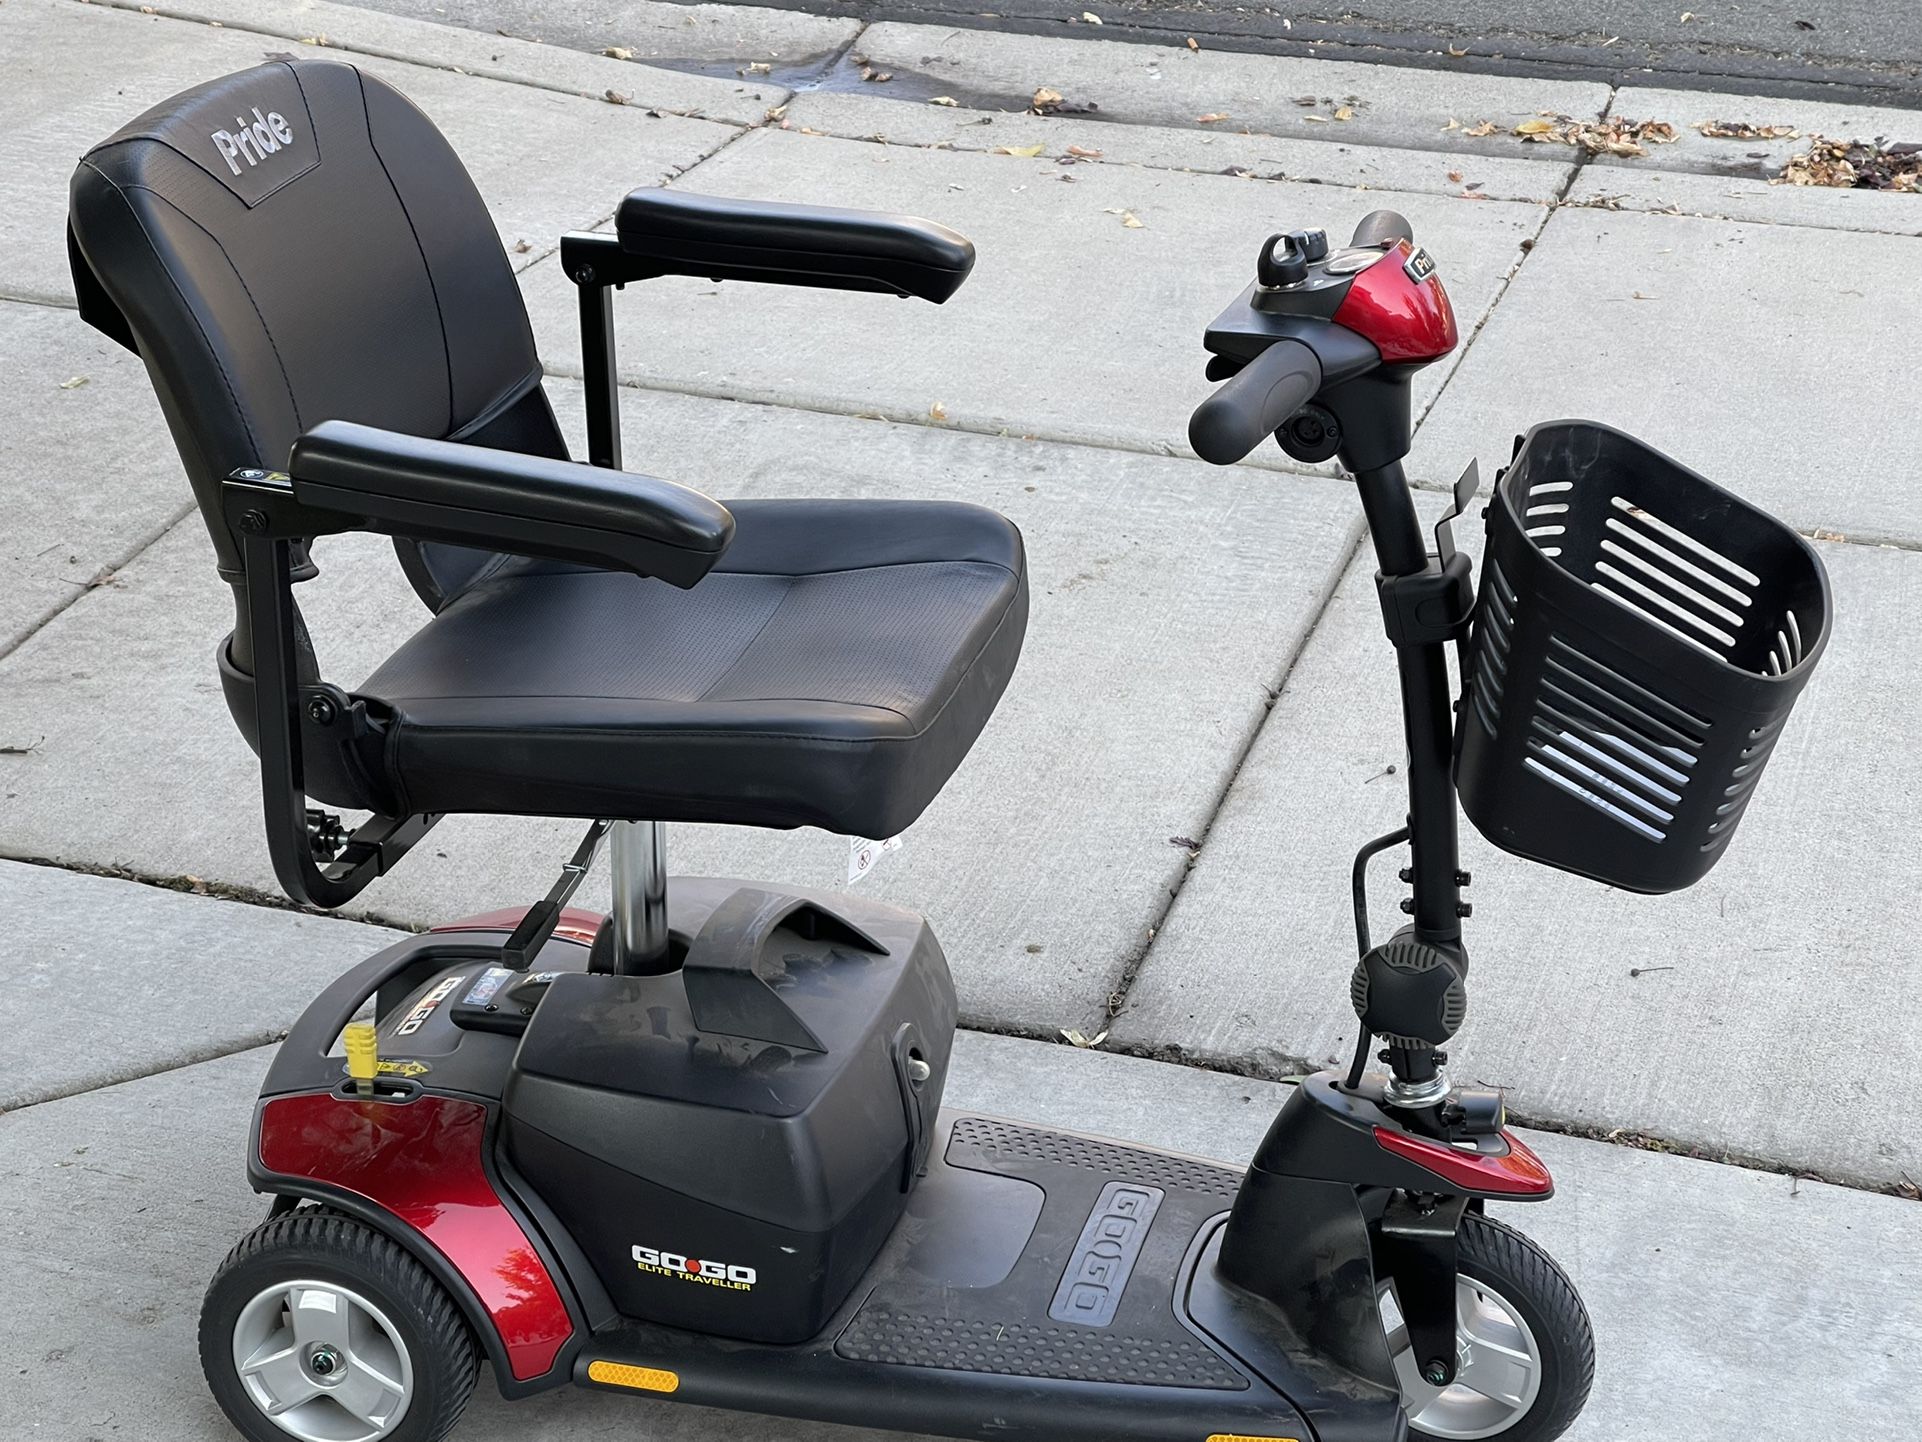 New Mobility scooter never used